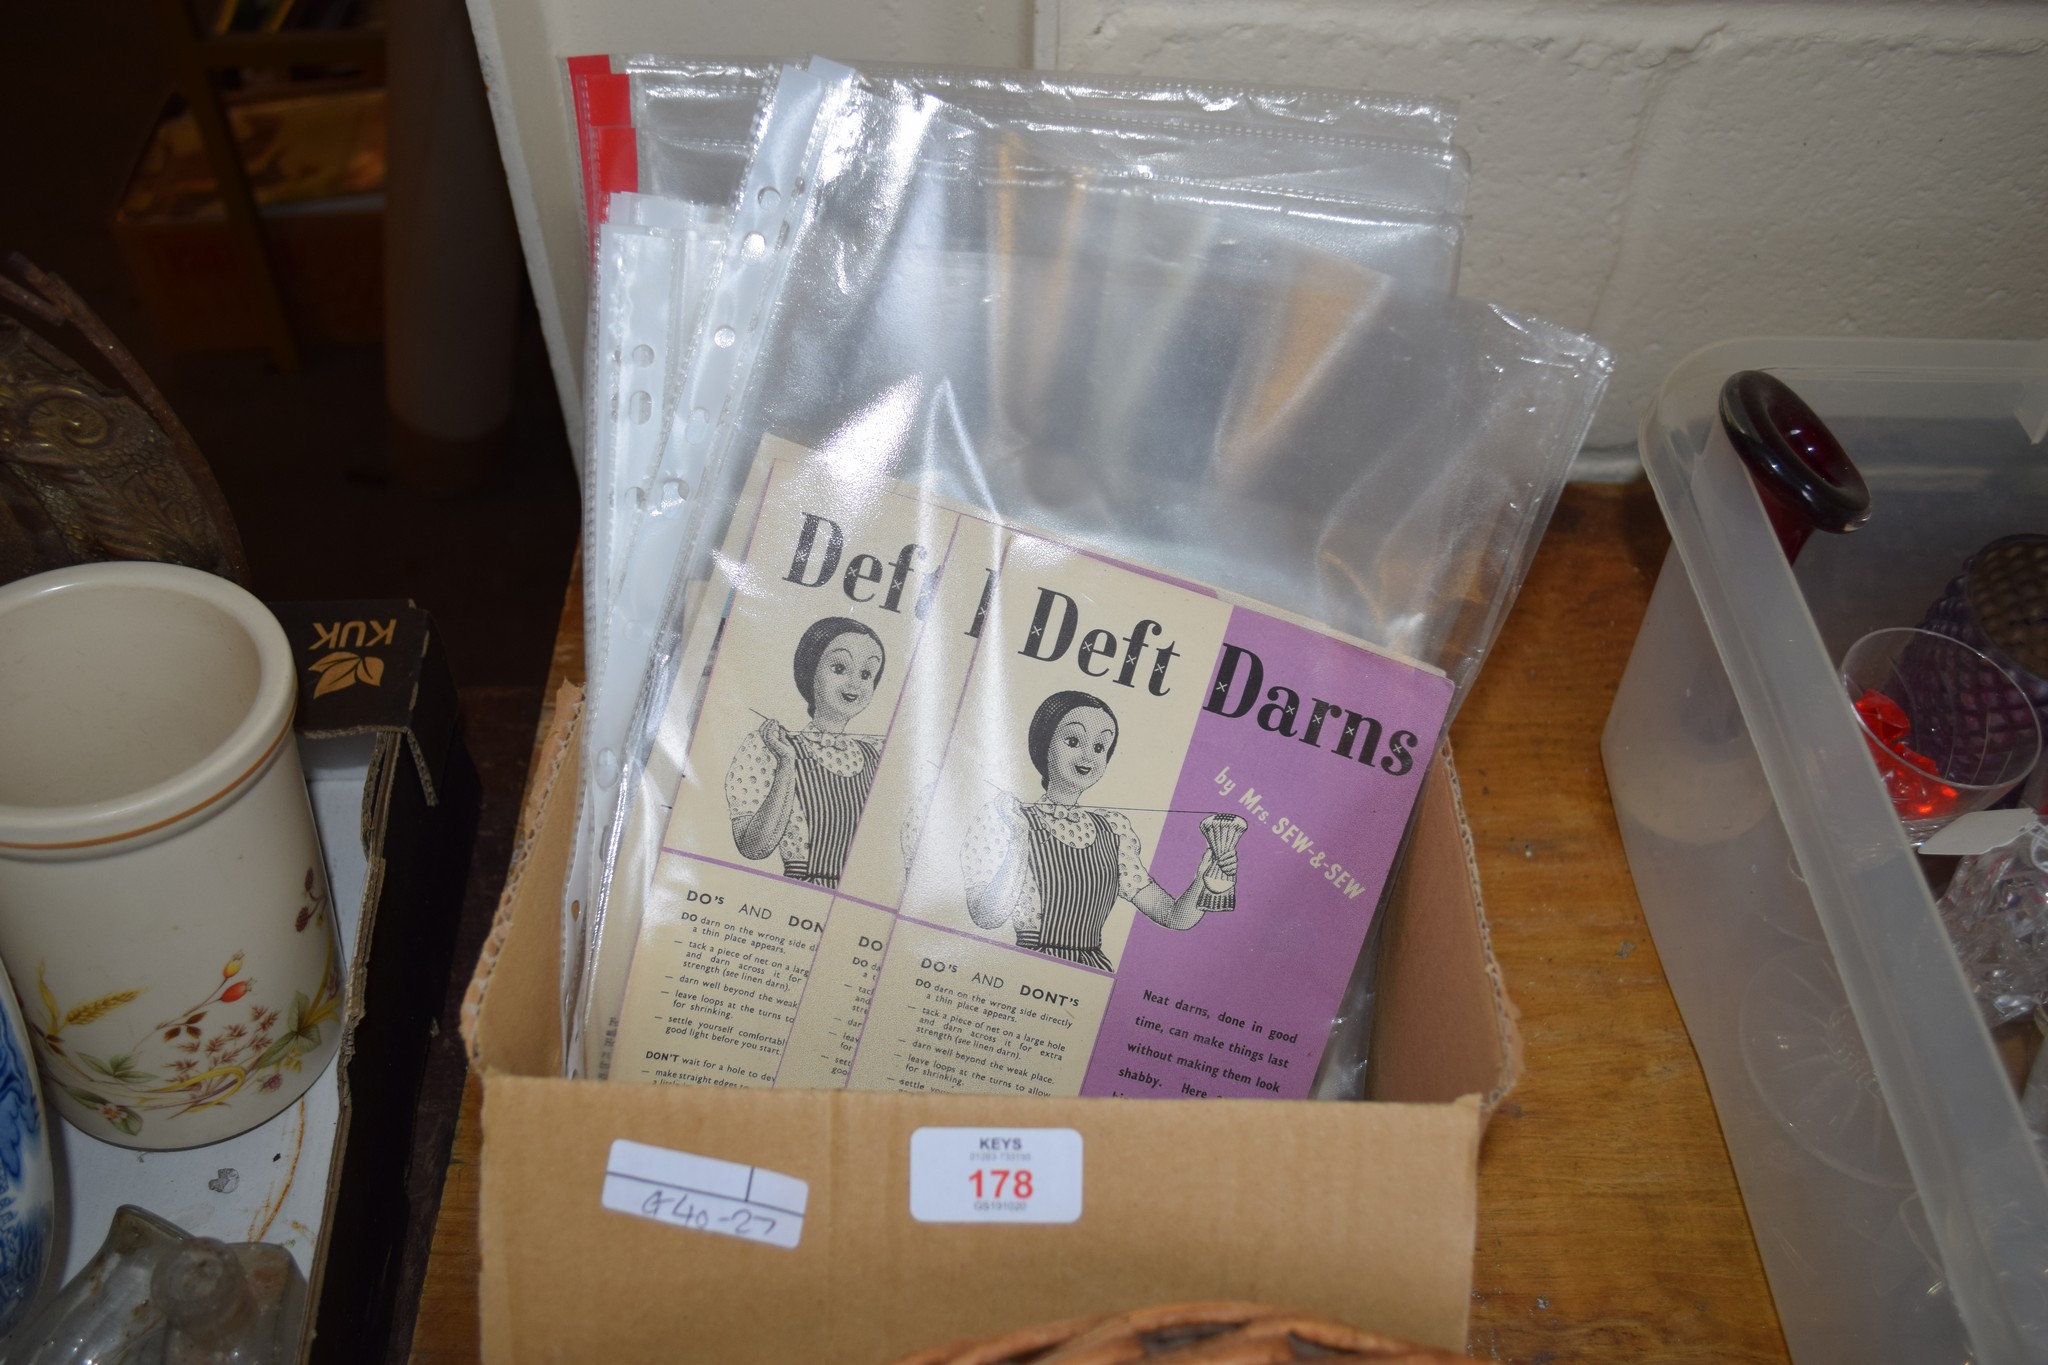 SEWING ITEMS AND MAGAZINES “DEFT DARNS” AND “LOOK AFTER YOUR WOOLLENS”